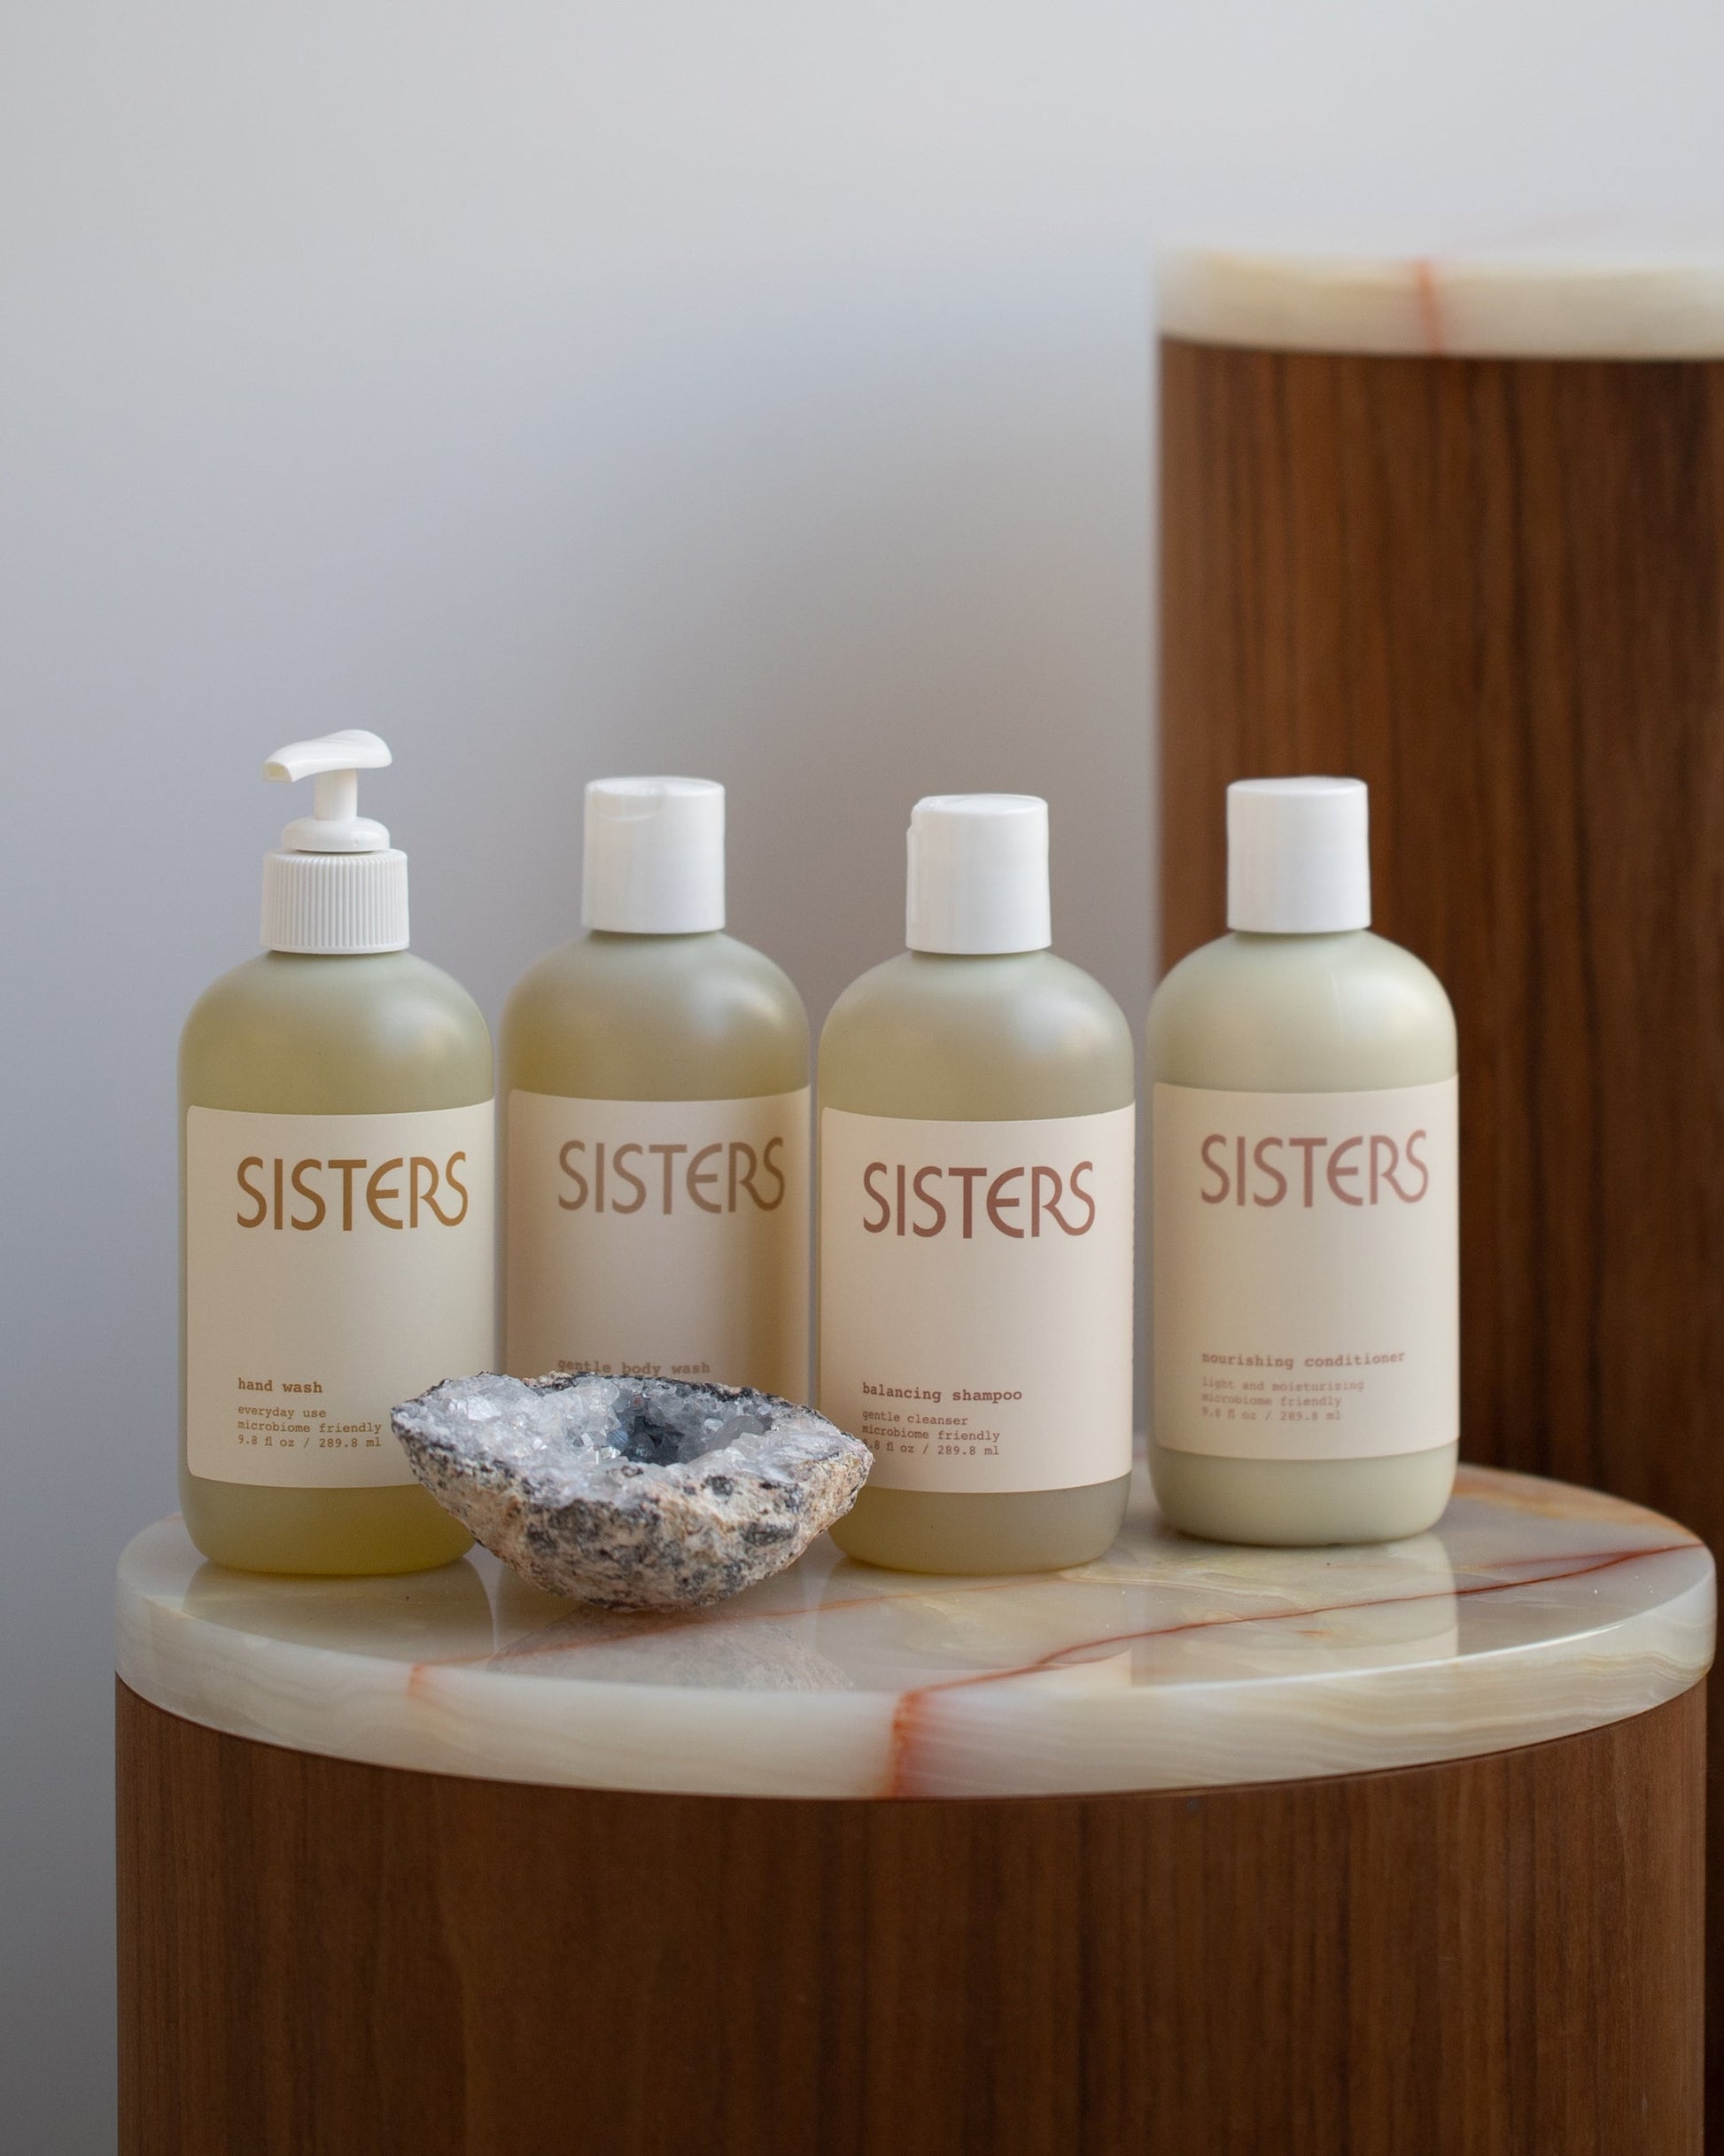 Styled image of the Sisters Body Hand Soap, Gentle Body Wash, Balancing Shampoo and Nourishing Conditioner.